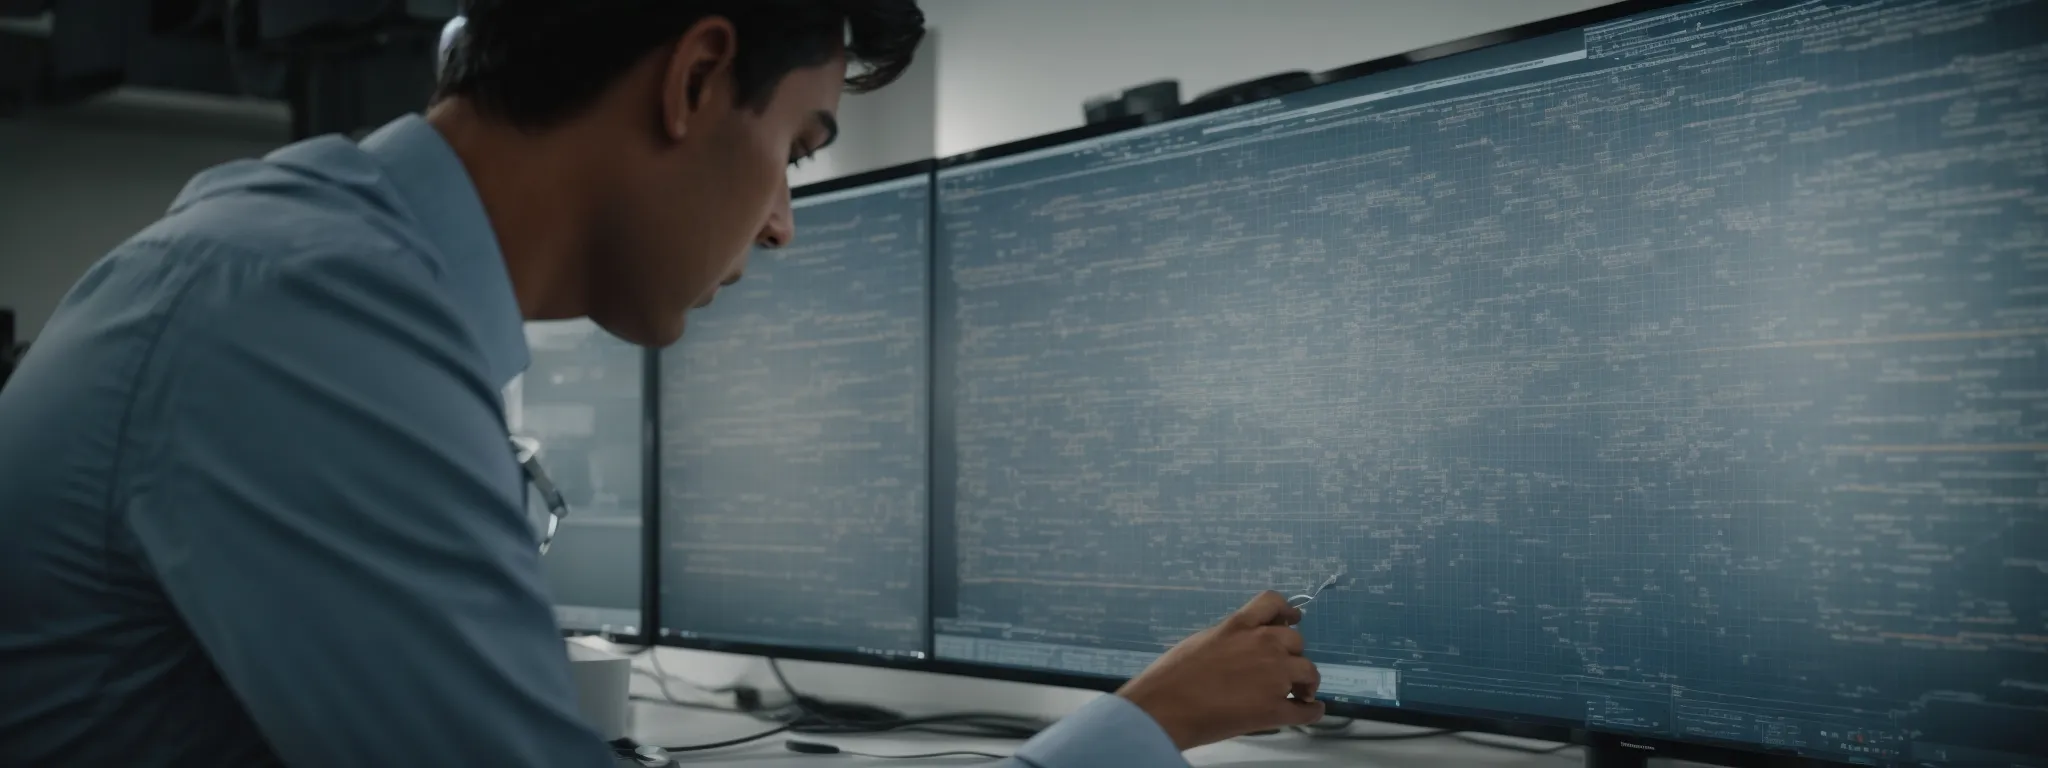 a person analyzing a complex network diagram on a large monitor in a bright office.